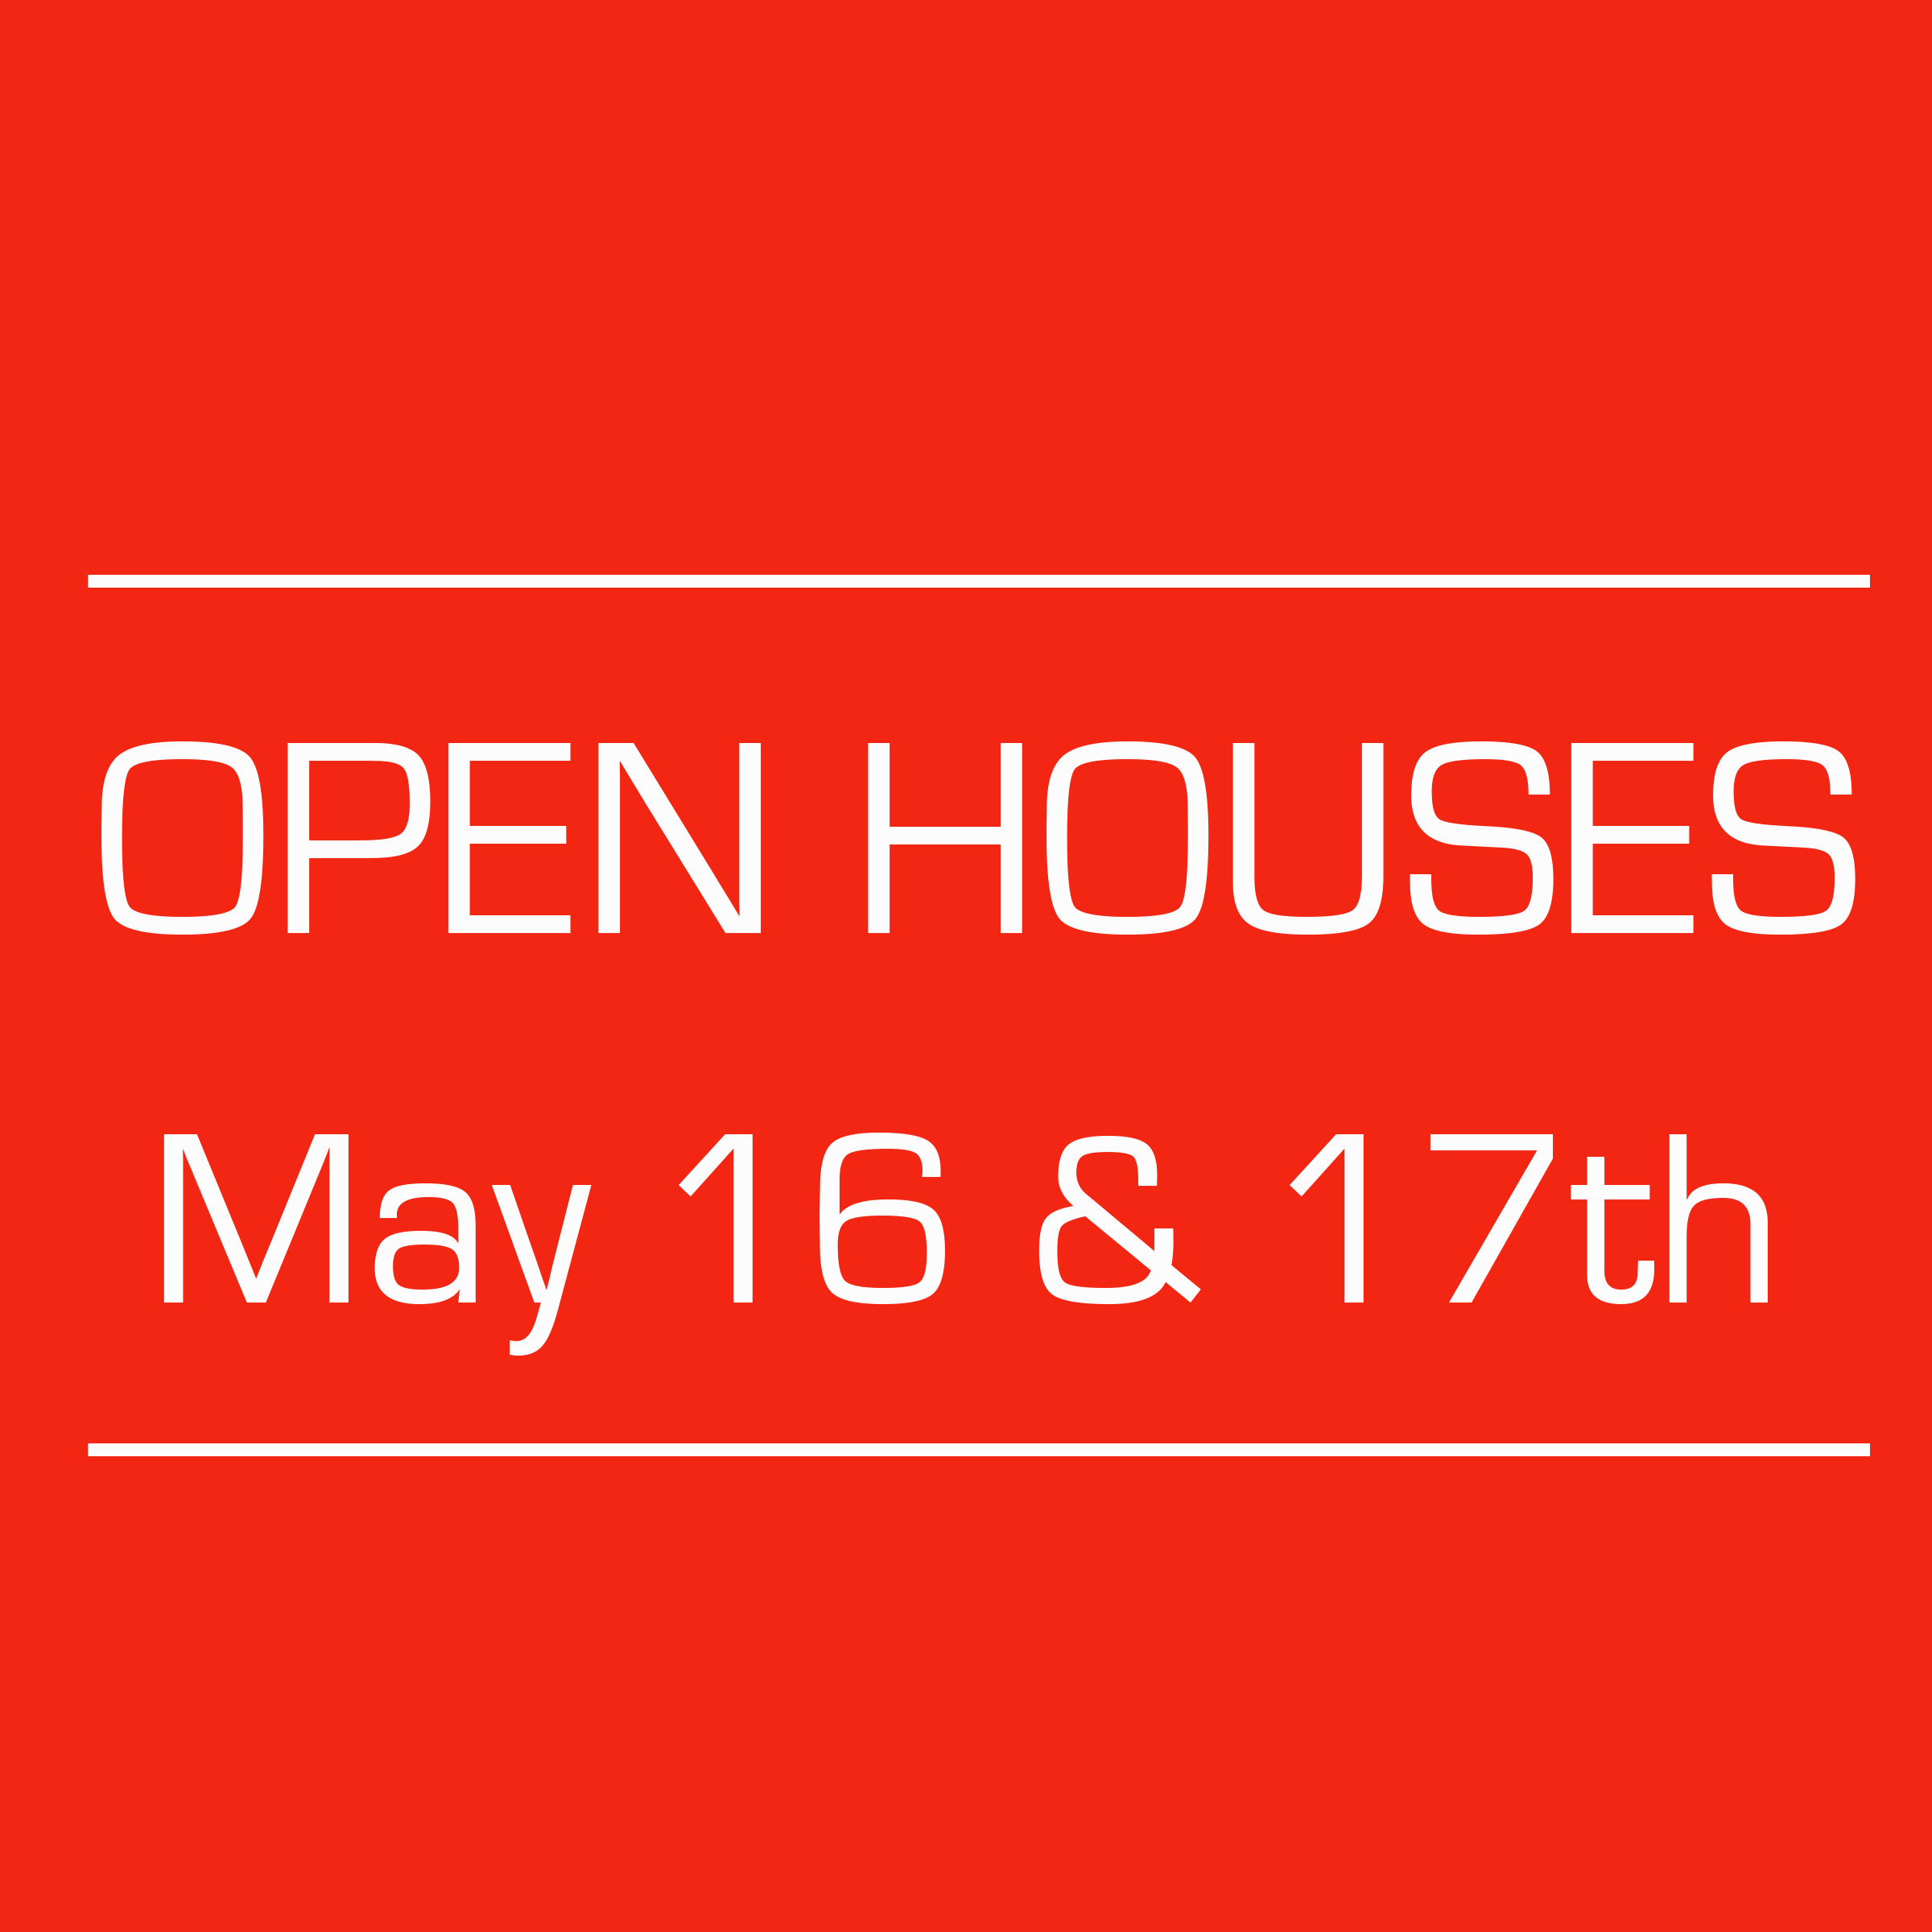 OPEN HOUSES | MAY 16th & 17th 